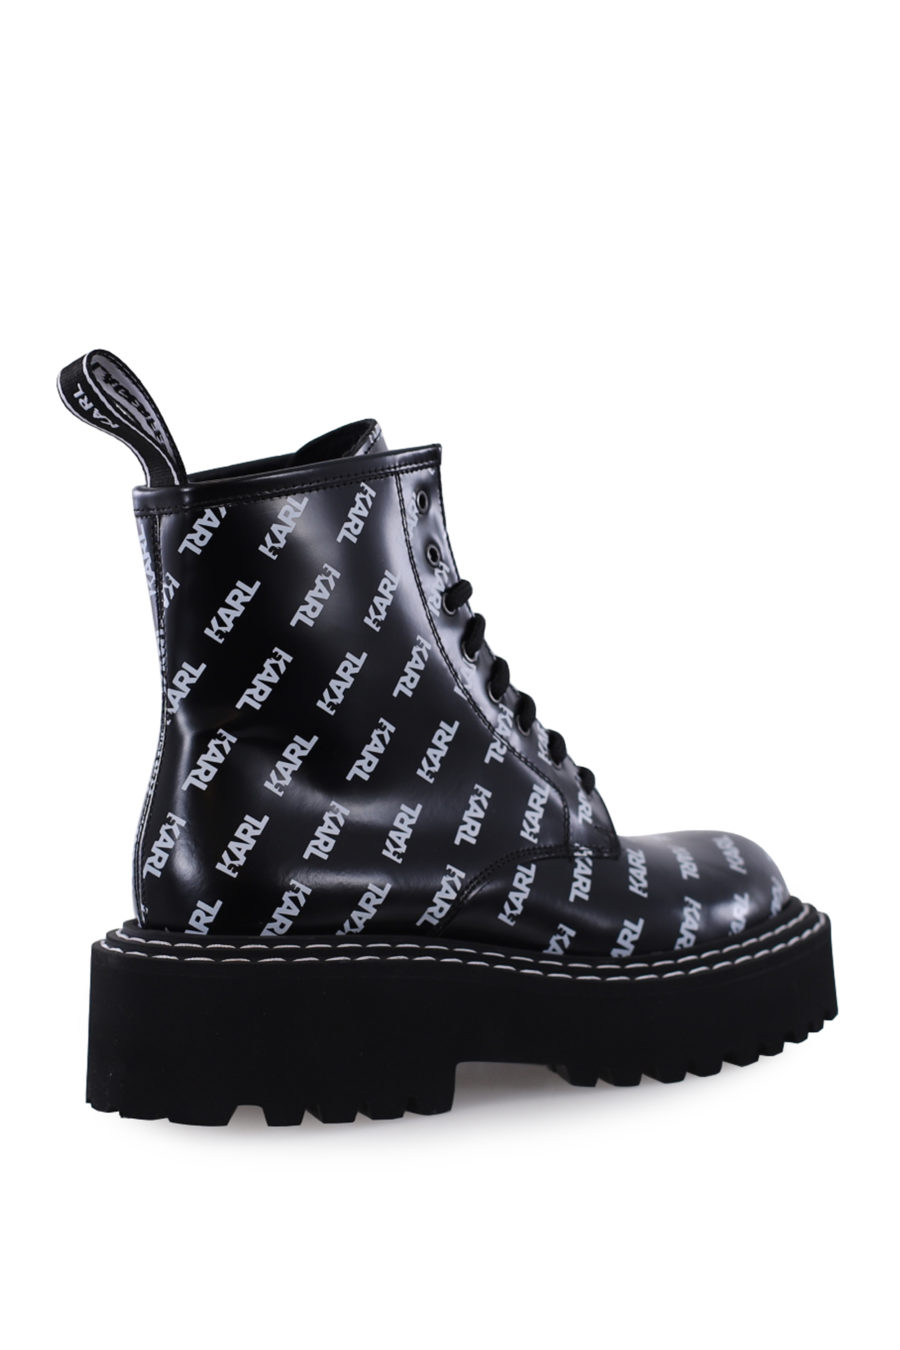 Black ankle boots with multiple logo - IMG 0179